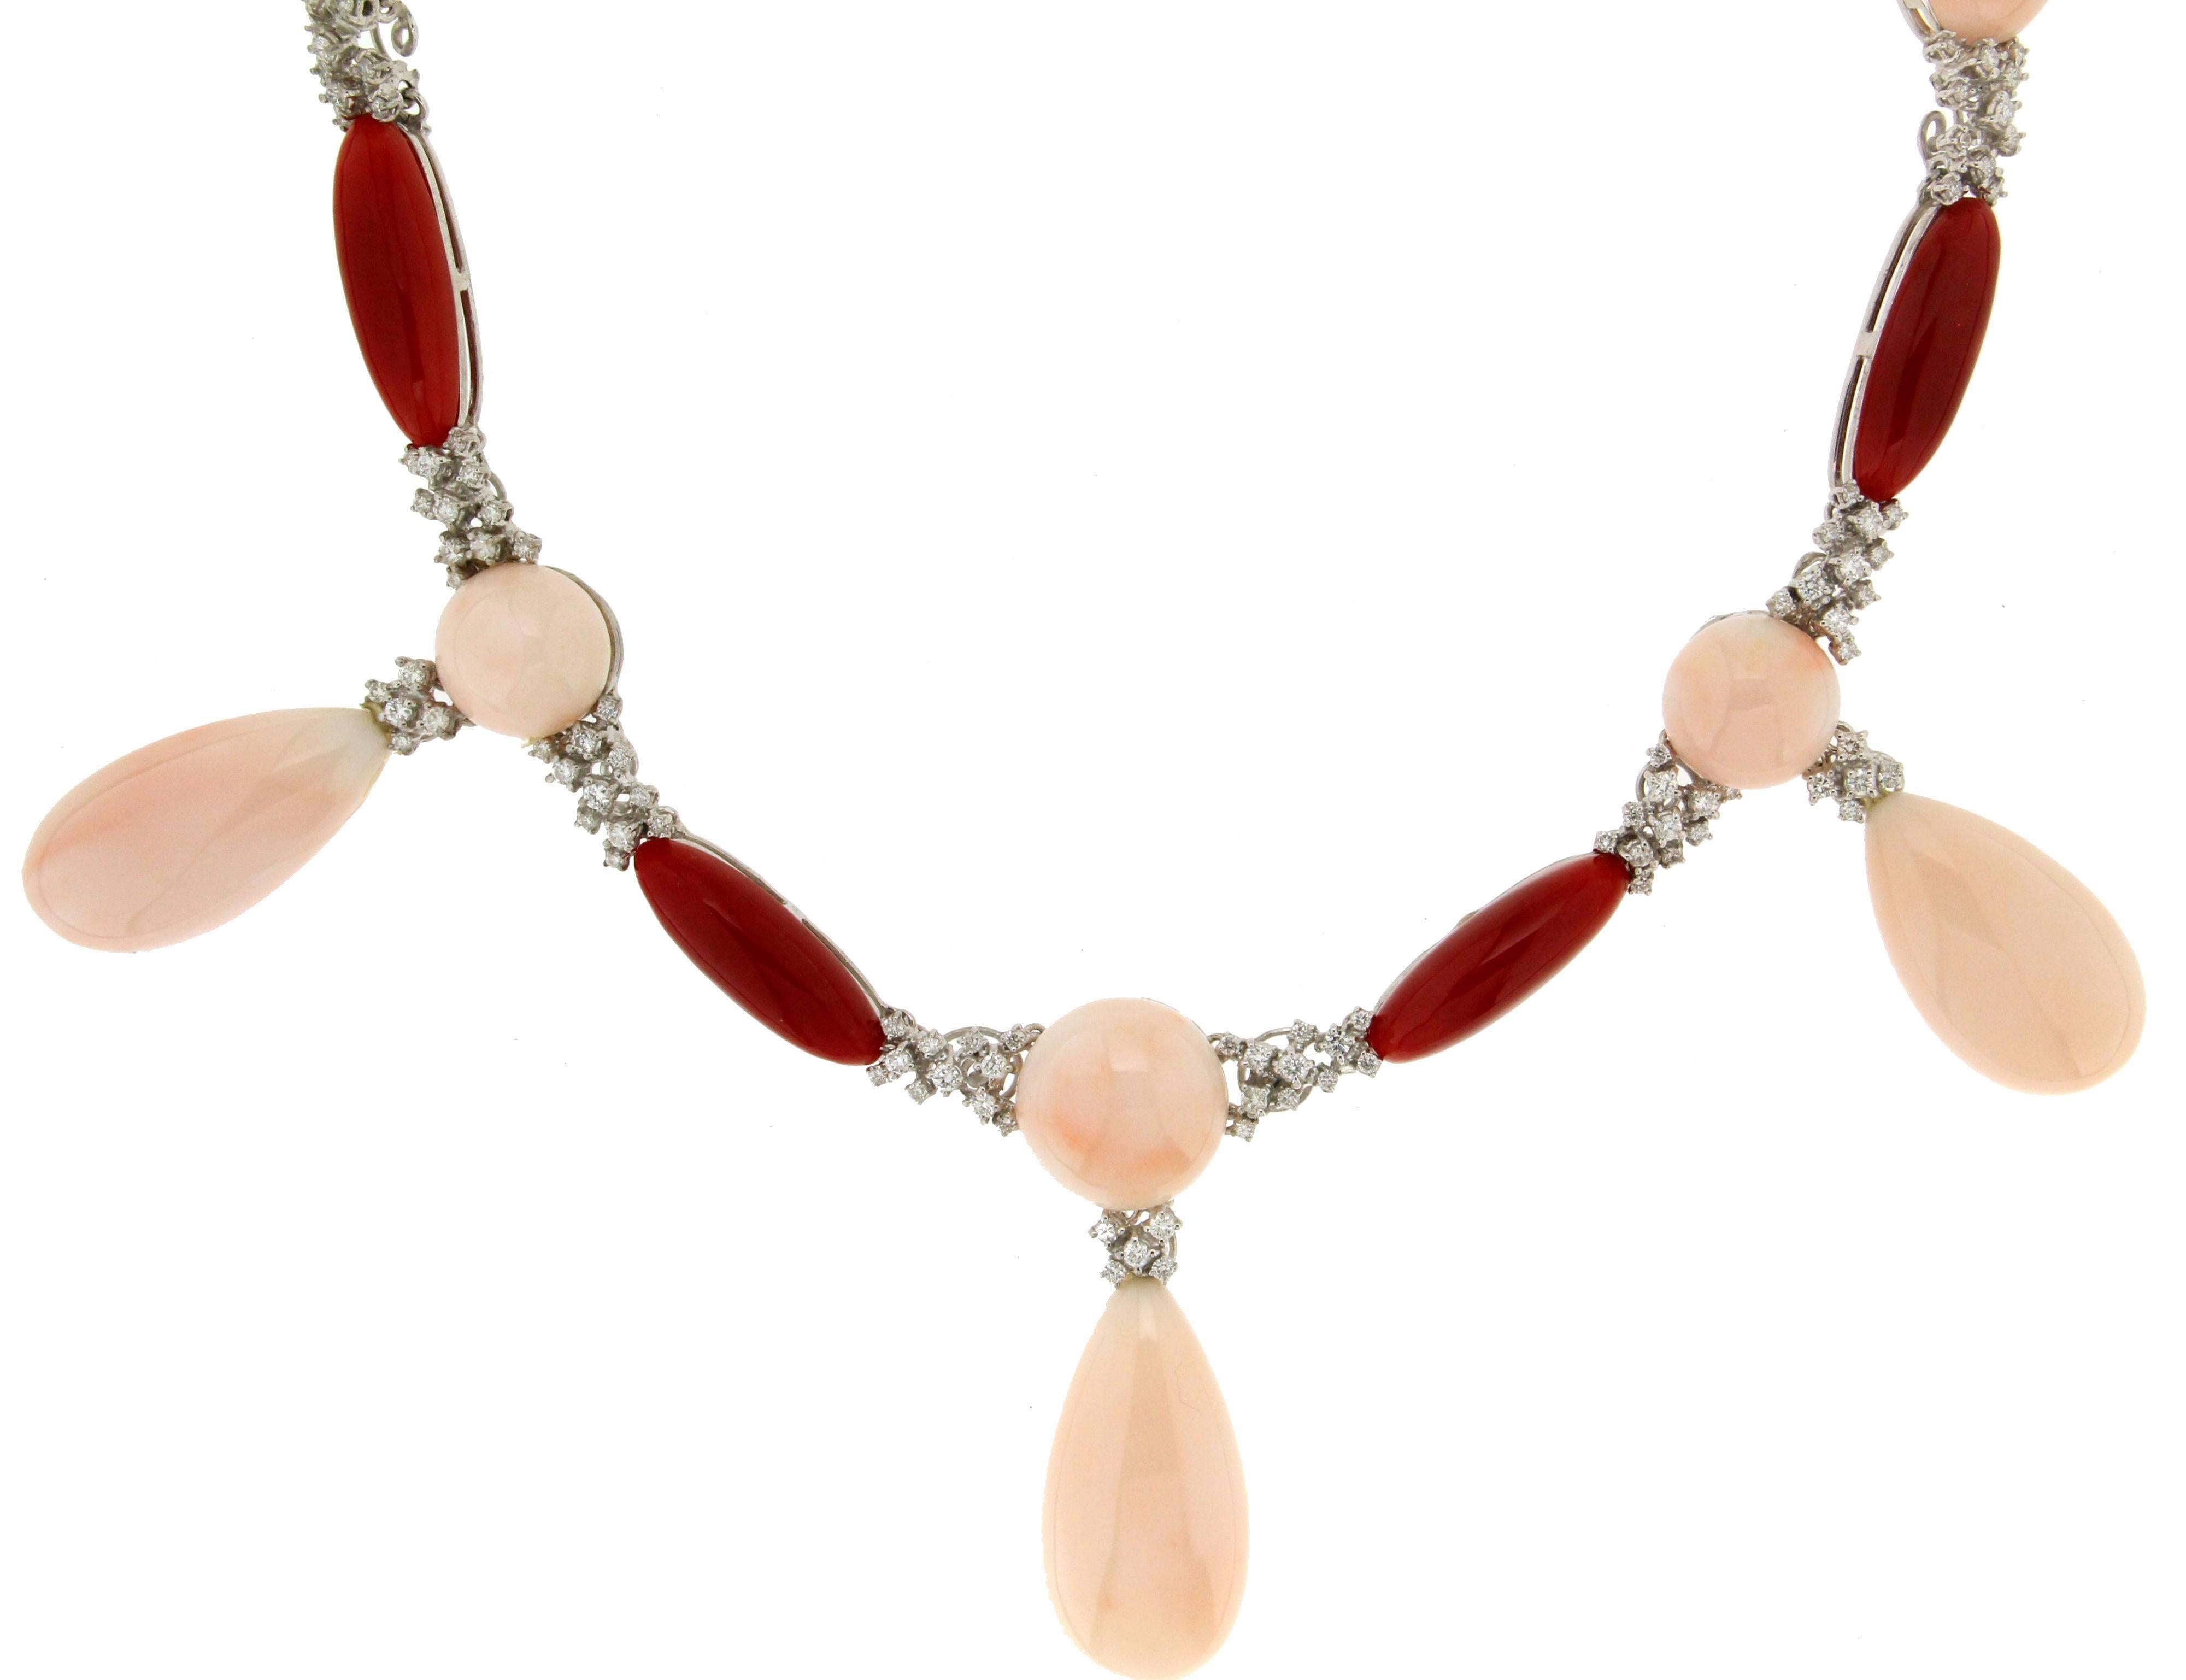 Angel Skin Coral and Red Sardinian Coral White Gold 18 Carat Diamonds Choker Necklace

Necklace Total weight 80 grams
Diamonds weight 3 carat
Coral weight 40.80 grams